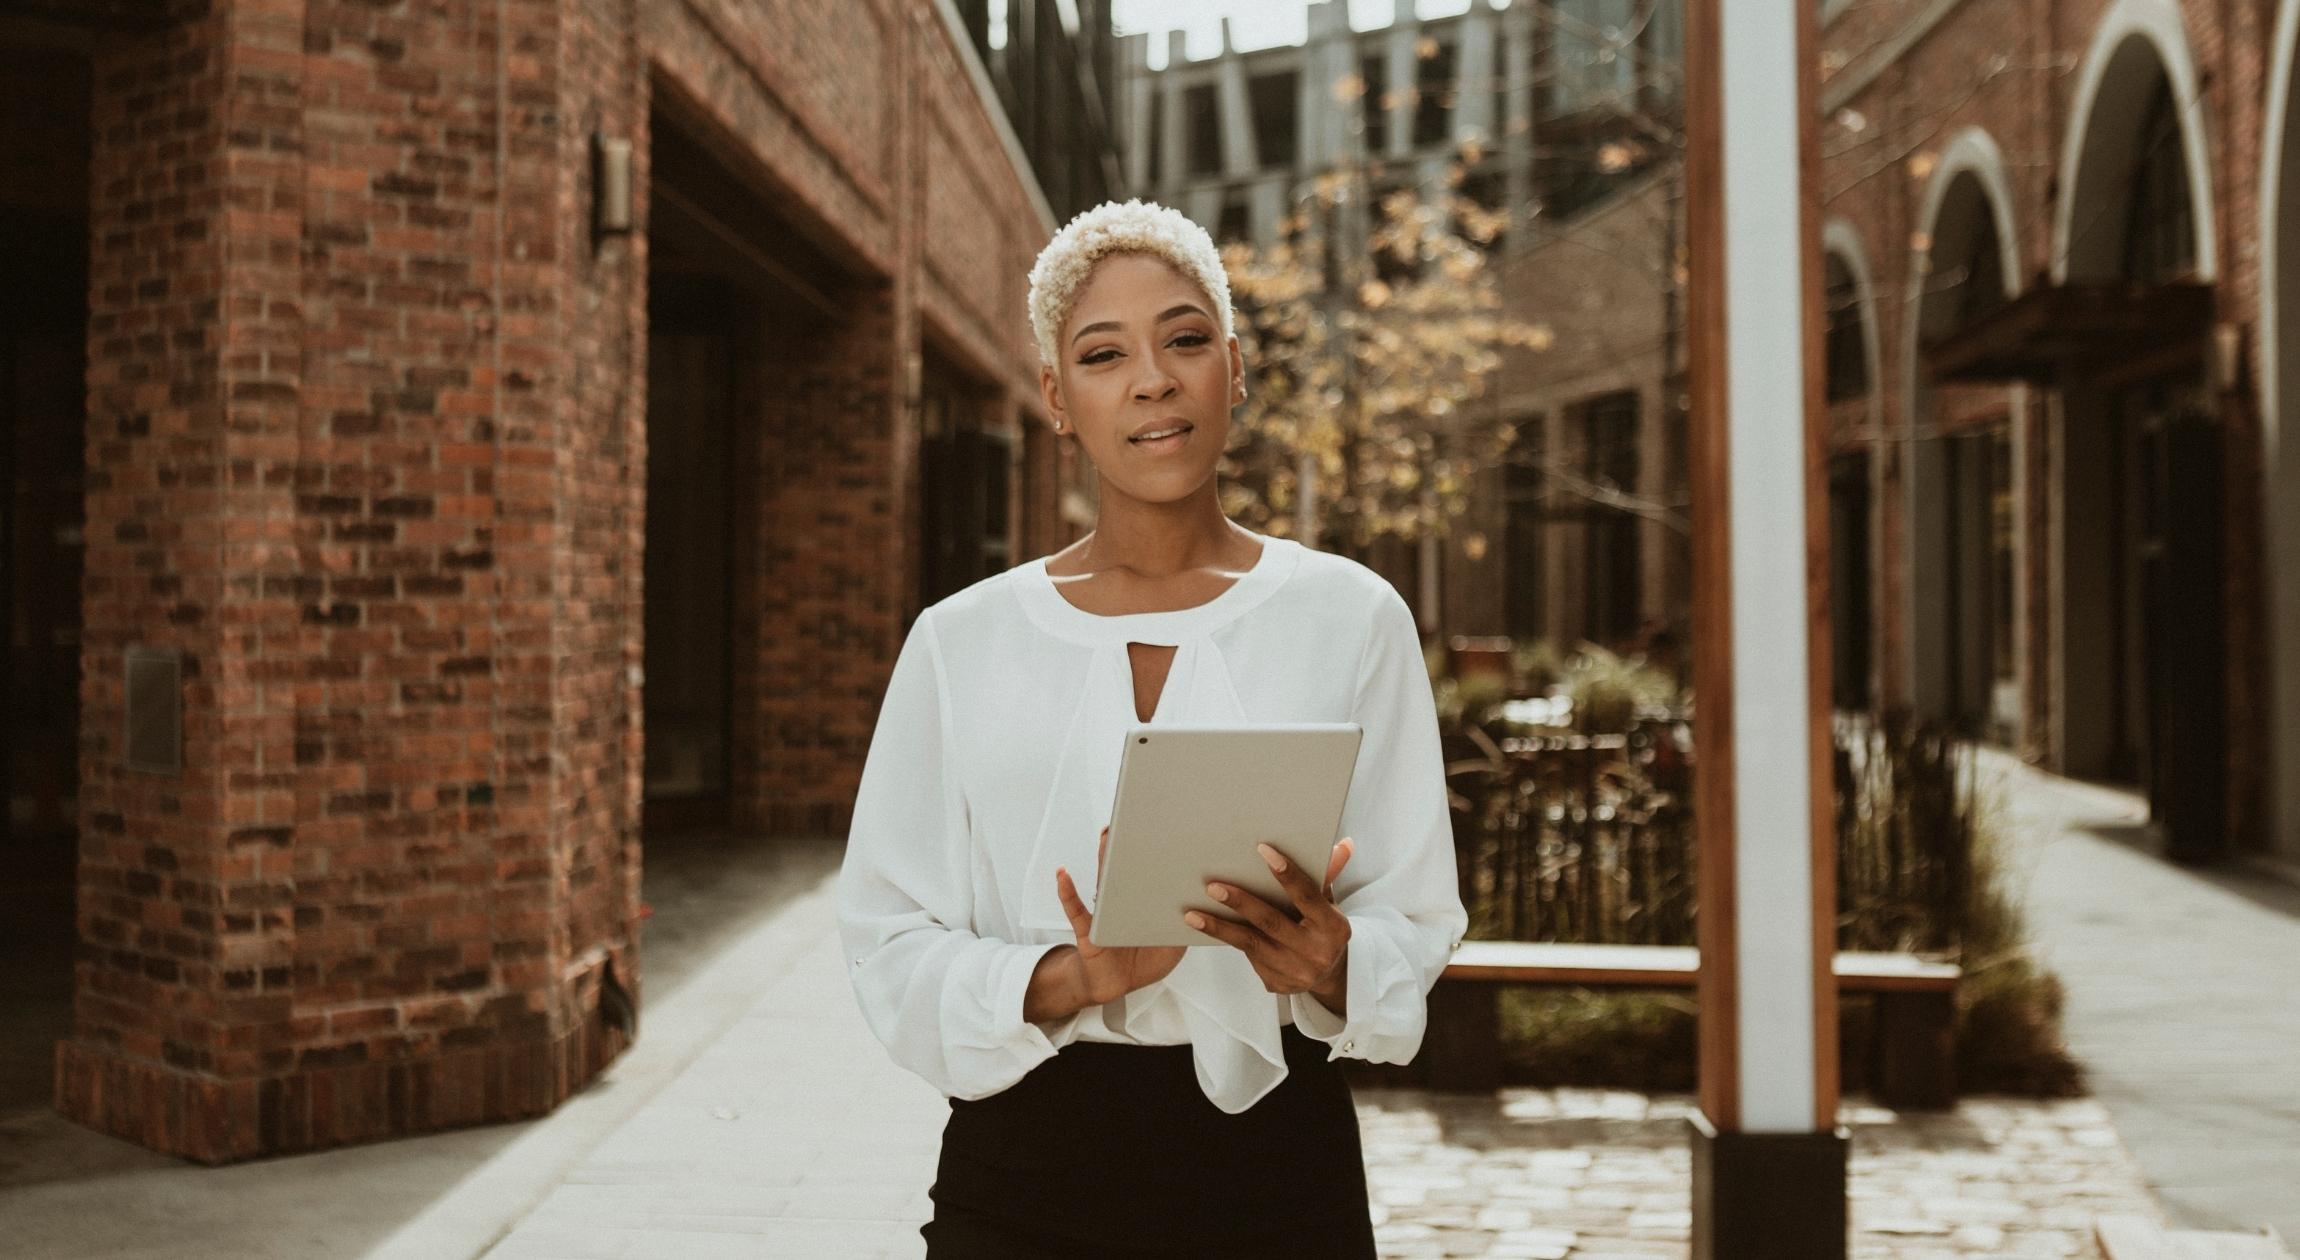 A Black woman with short blonde hair holds a clipboard